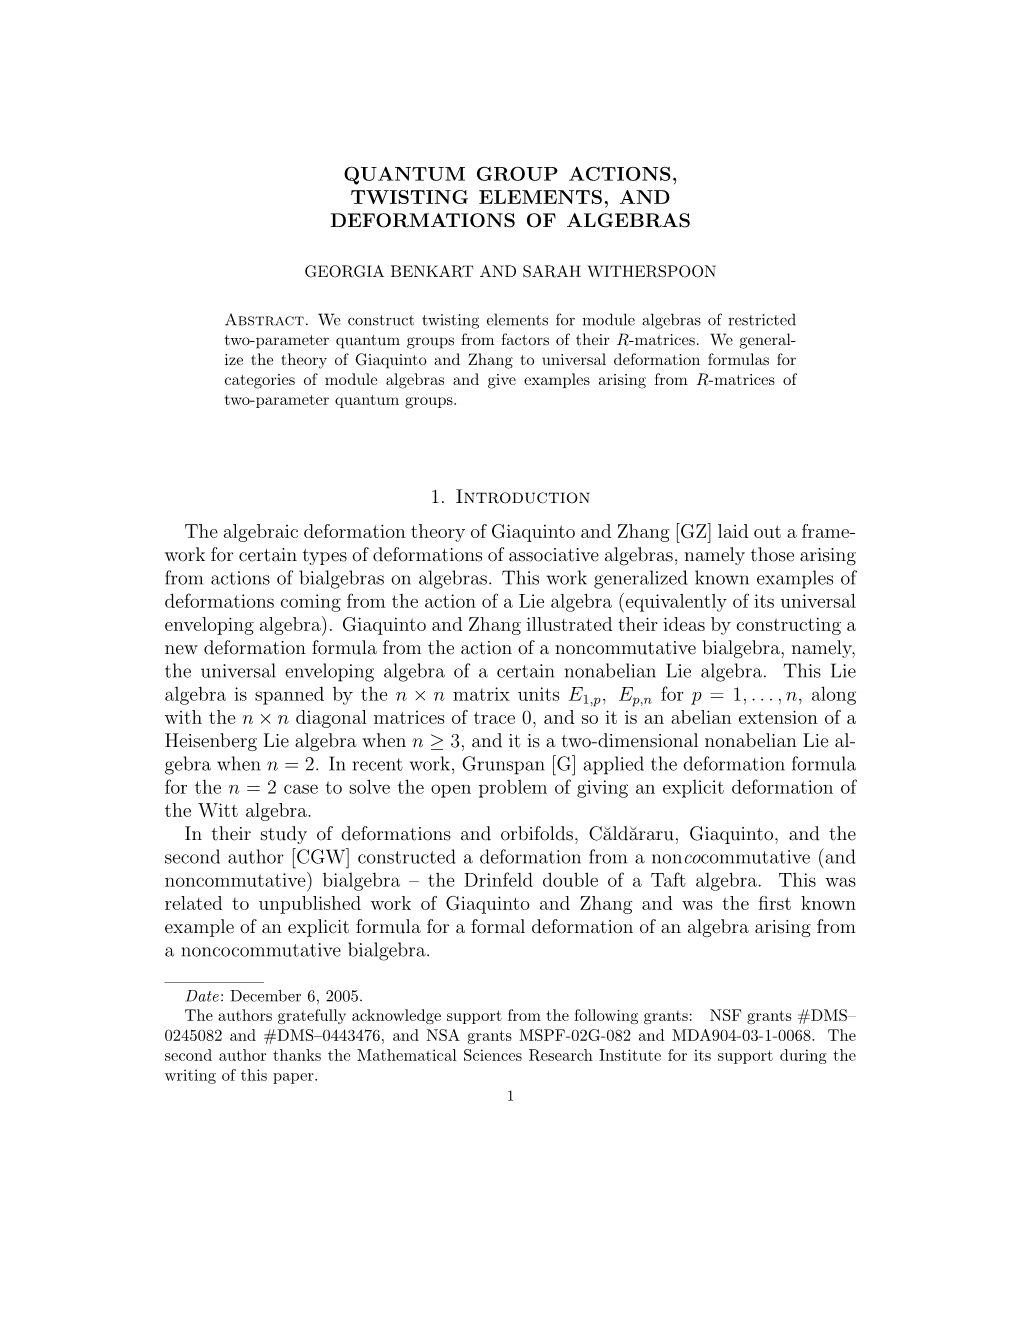 Quantum Group Actions, Twisting Elements, and Deformations of Algebras